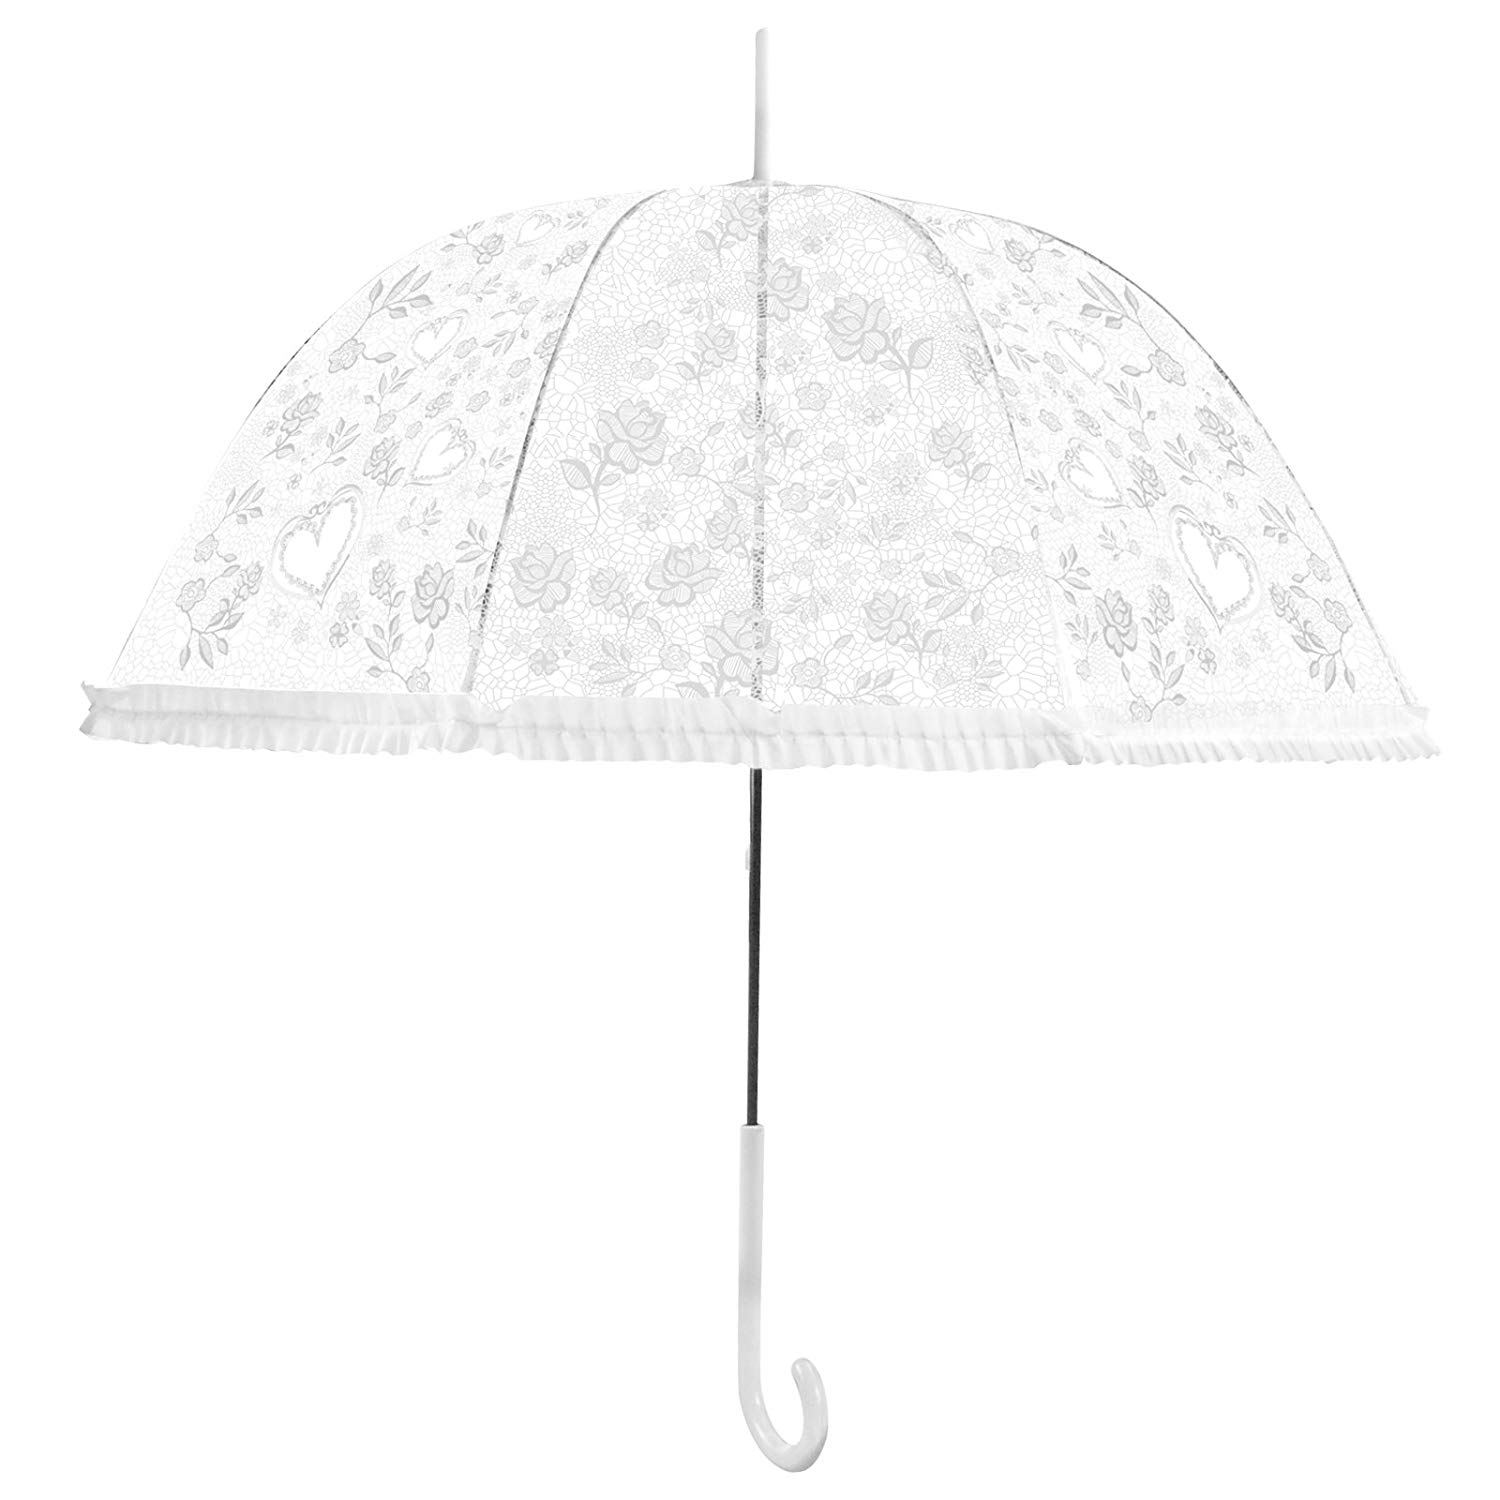 a product shot of a clear wedding umbrella for rain with white lacy flower and heart doodles and a small white ruffle edge